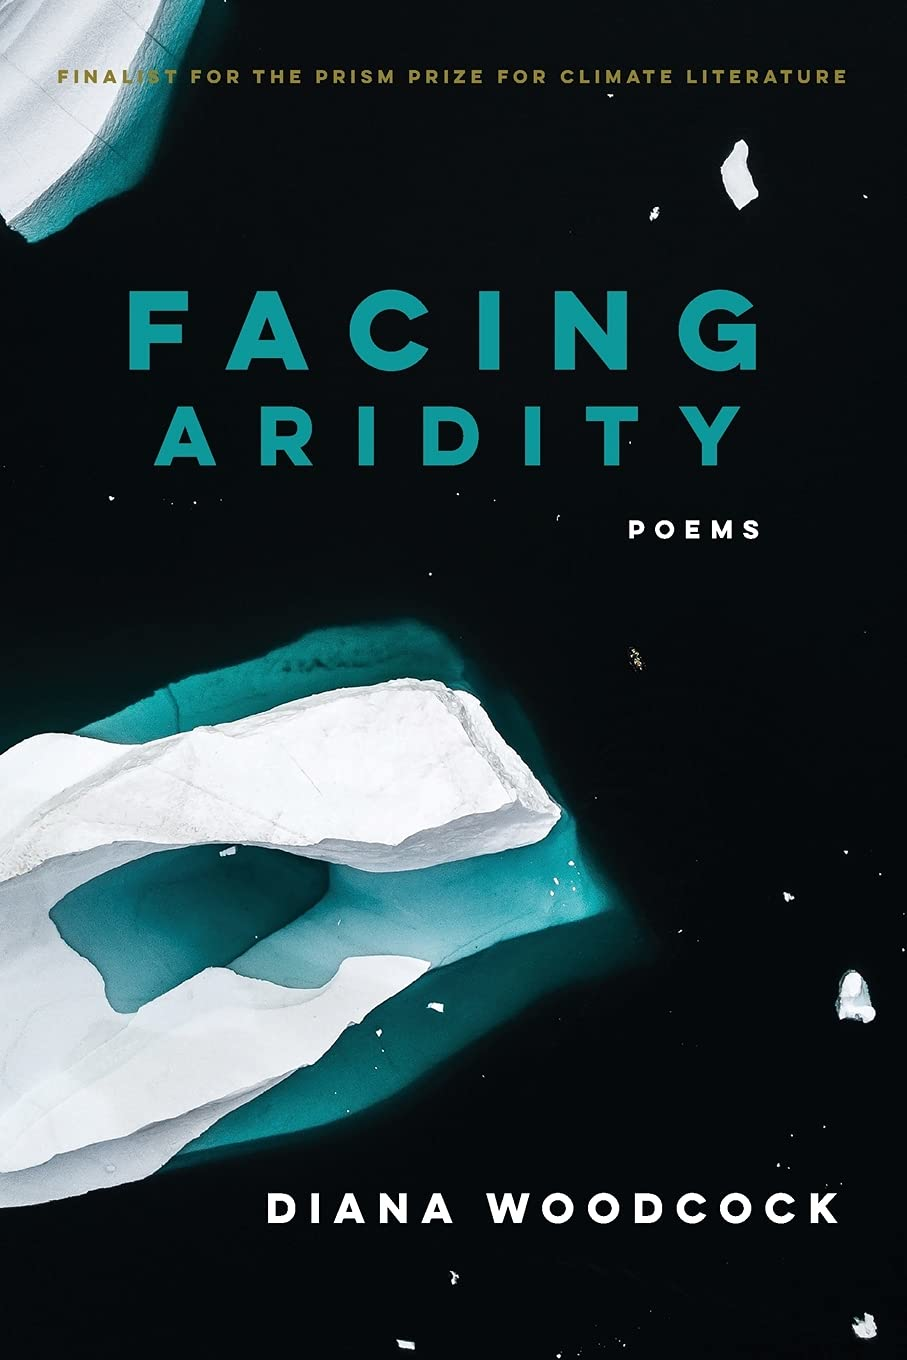 Book cover of FACING ARIDITY by Dr. Diana Woodcock.